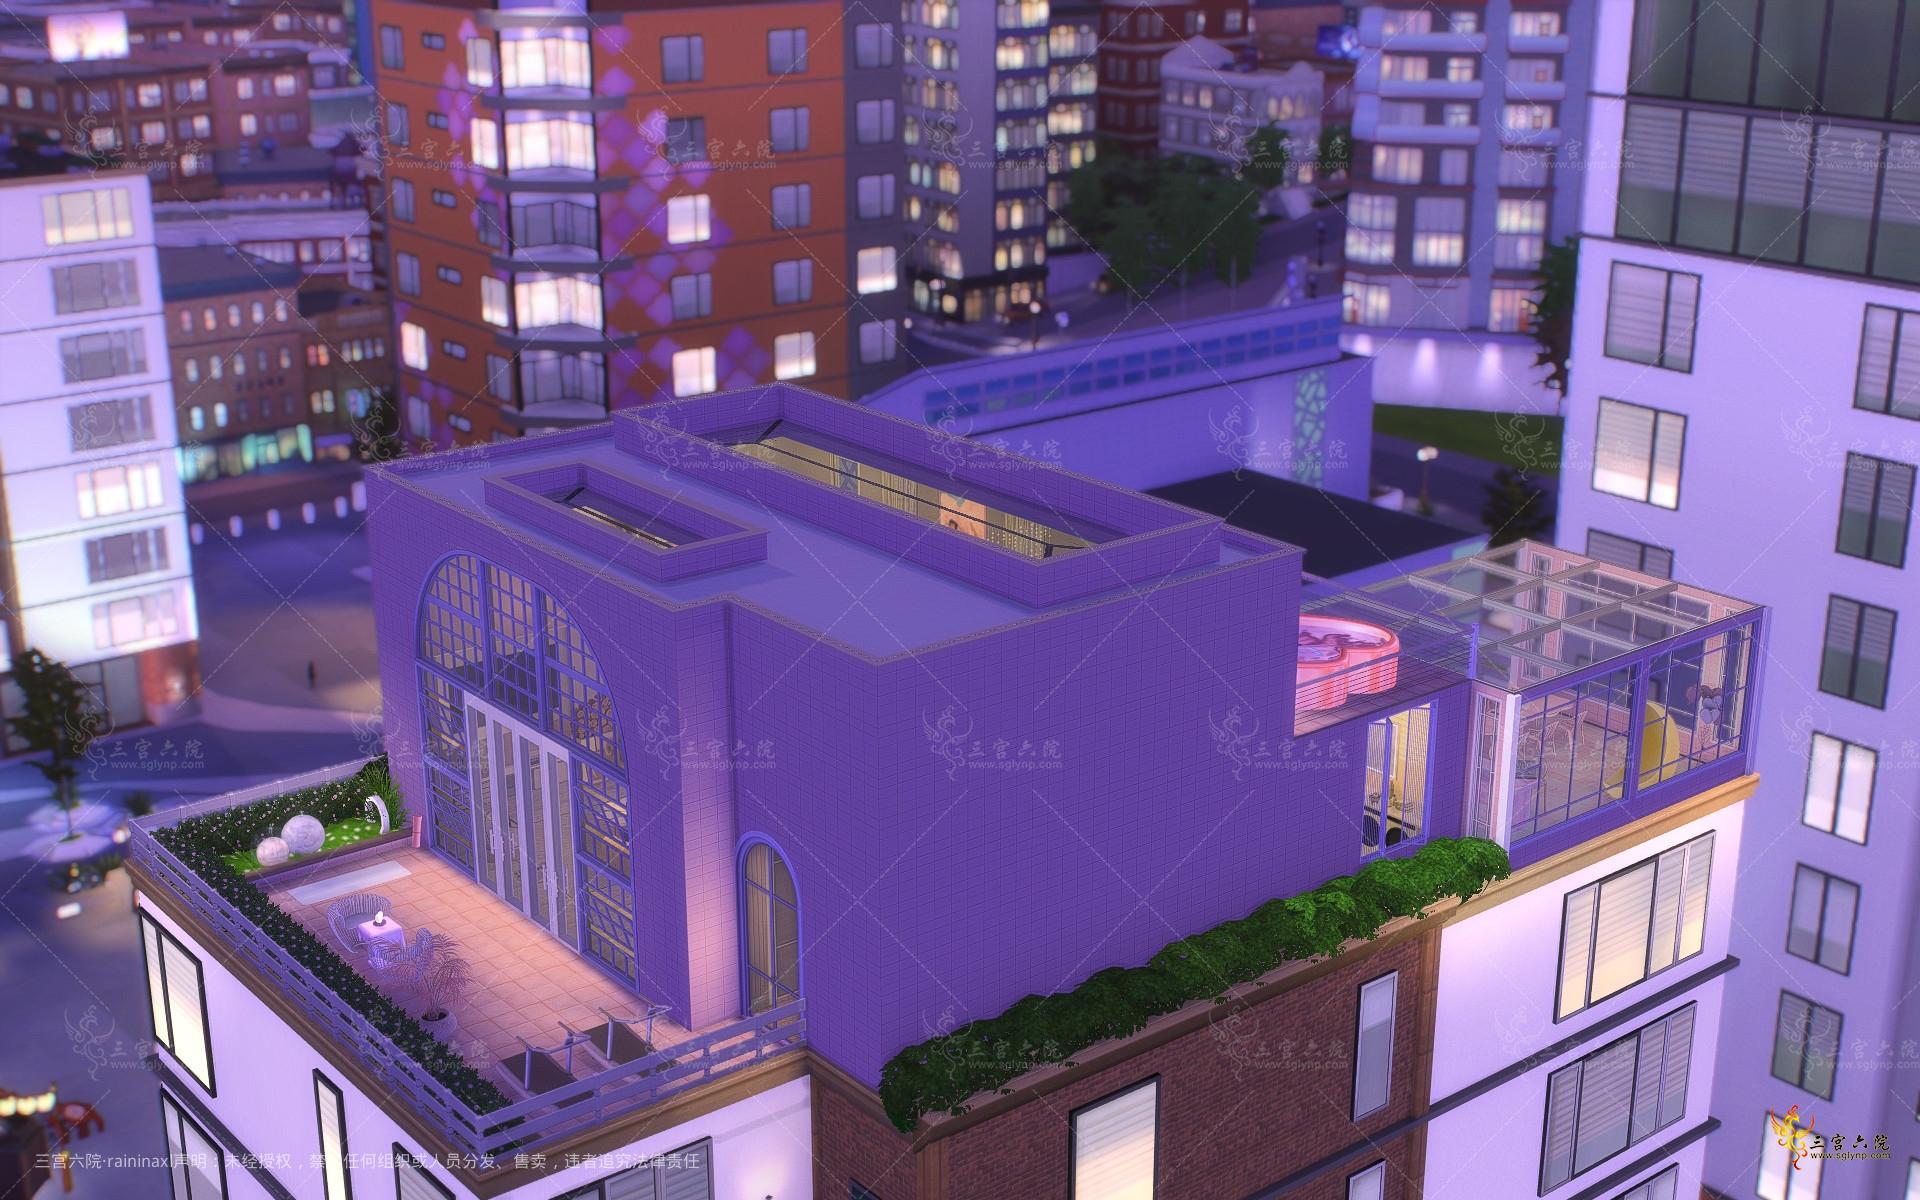 The Sims 4 2022_7_24 16_21_55.png